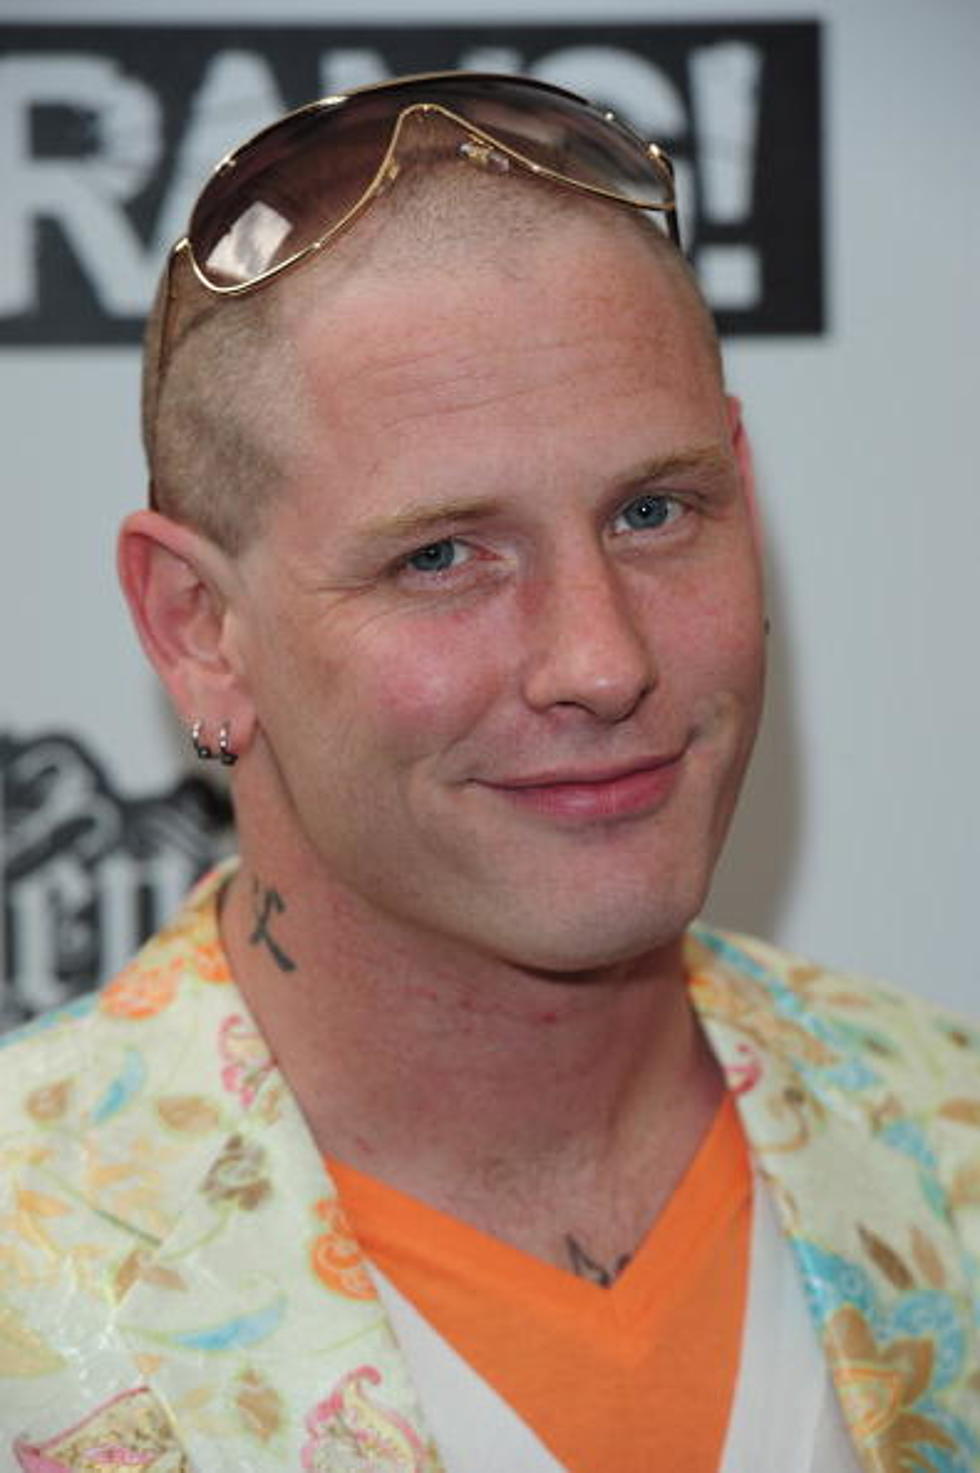 Corey Taylor Book “Seven Deadly Sins” In Stores July 12, 2011